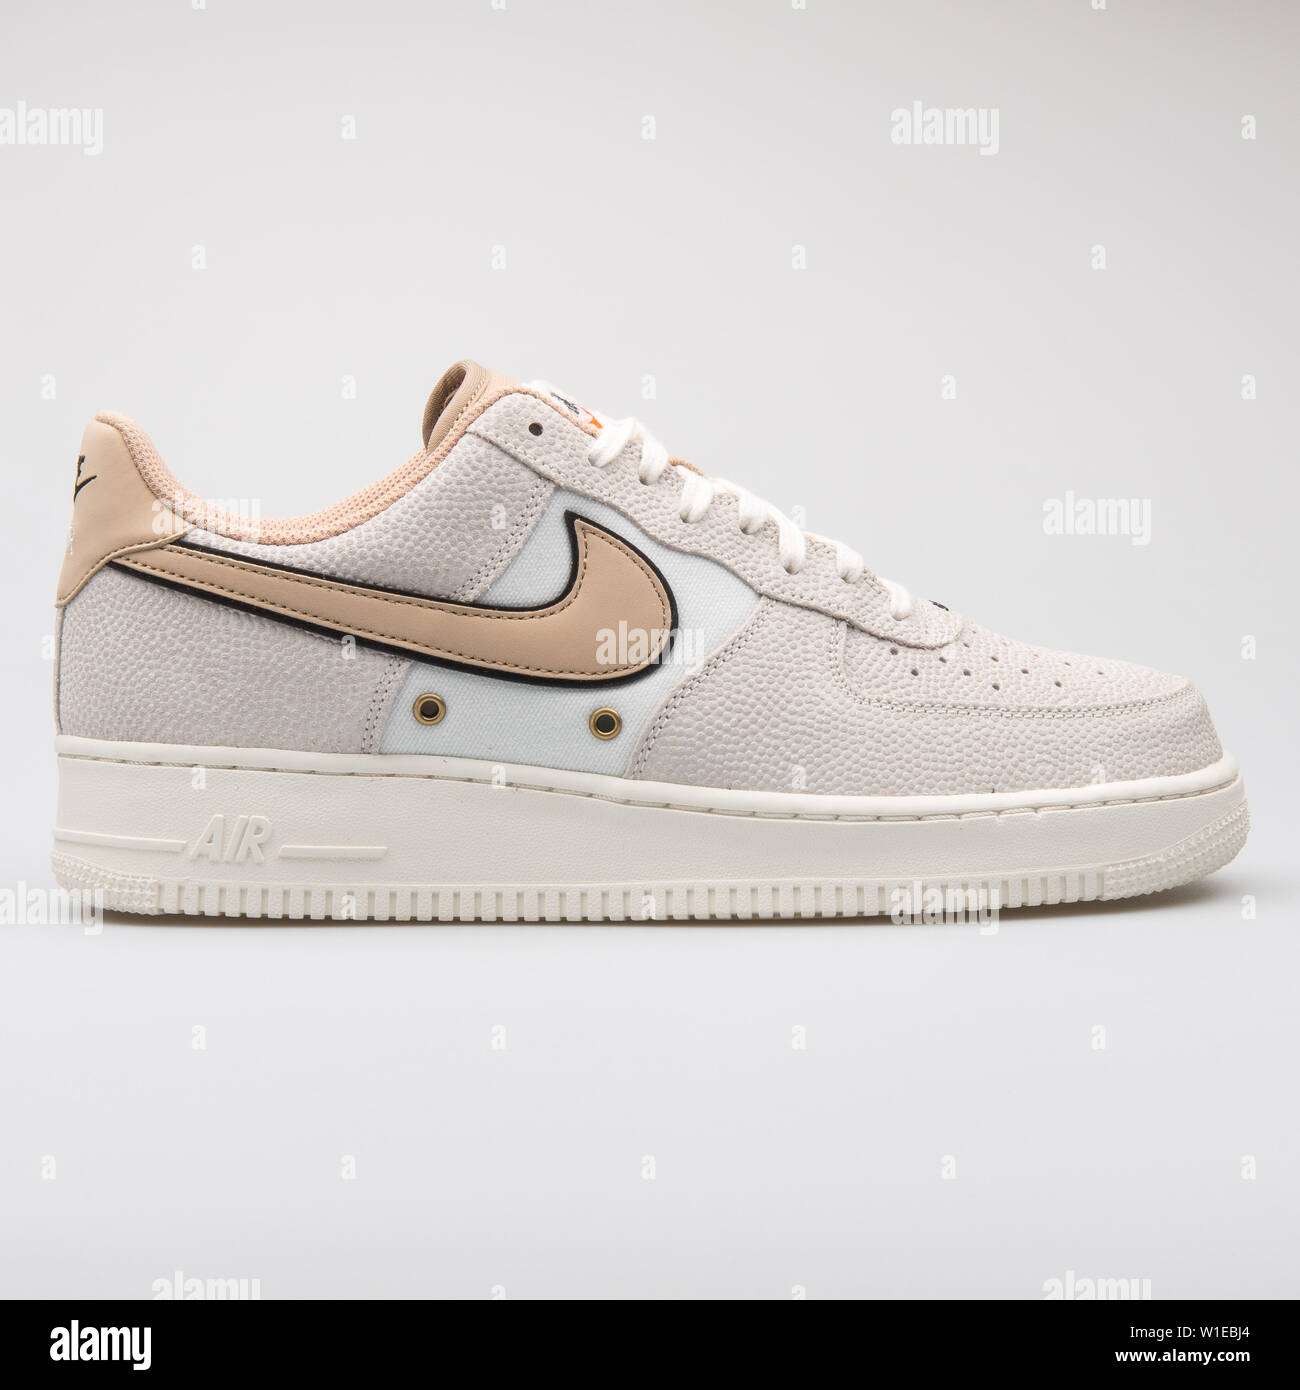 VIENNA, AUSTRIA - AUGUST 7, 2017: Nike Air Force 1 07 LV8 linen and white  sneaker on white background Stock Photo - Alamy